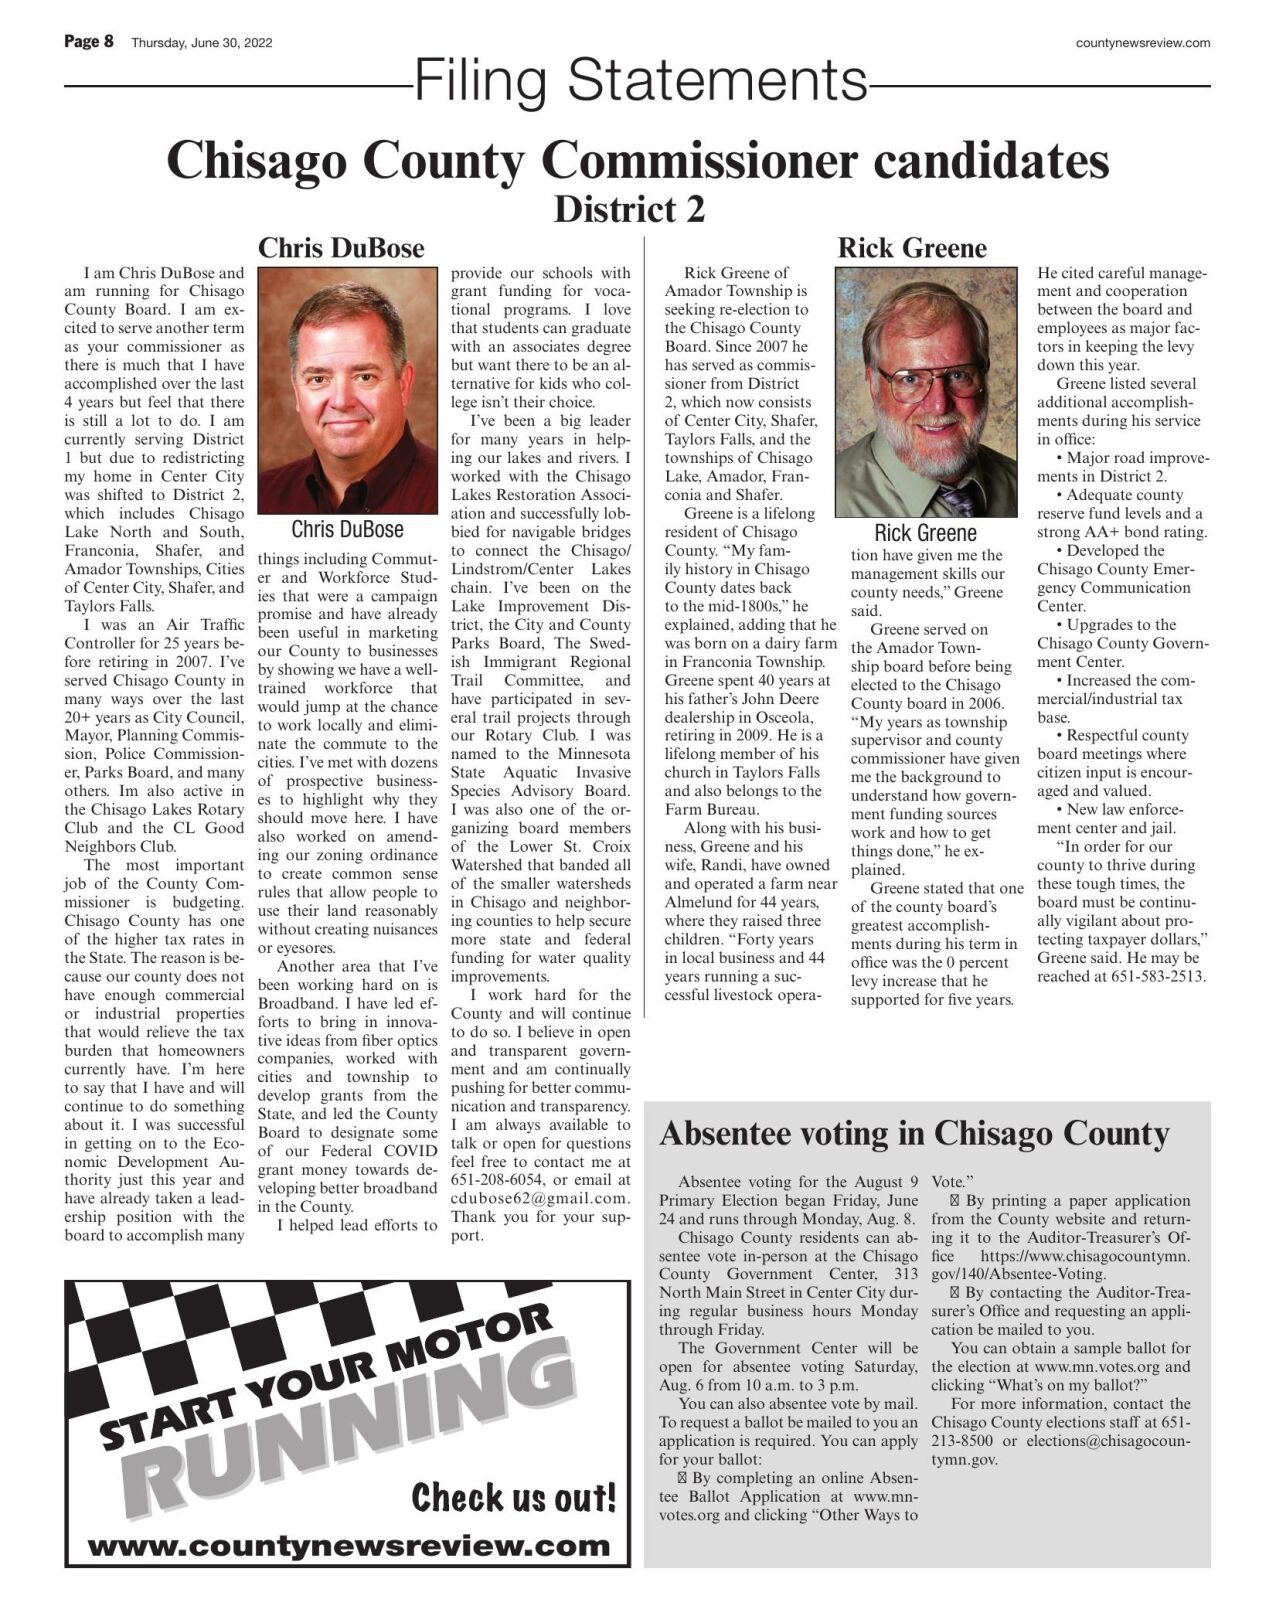 Chisago County Commissioner candidates